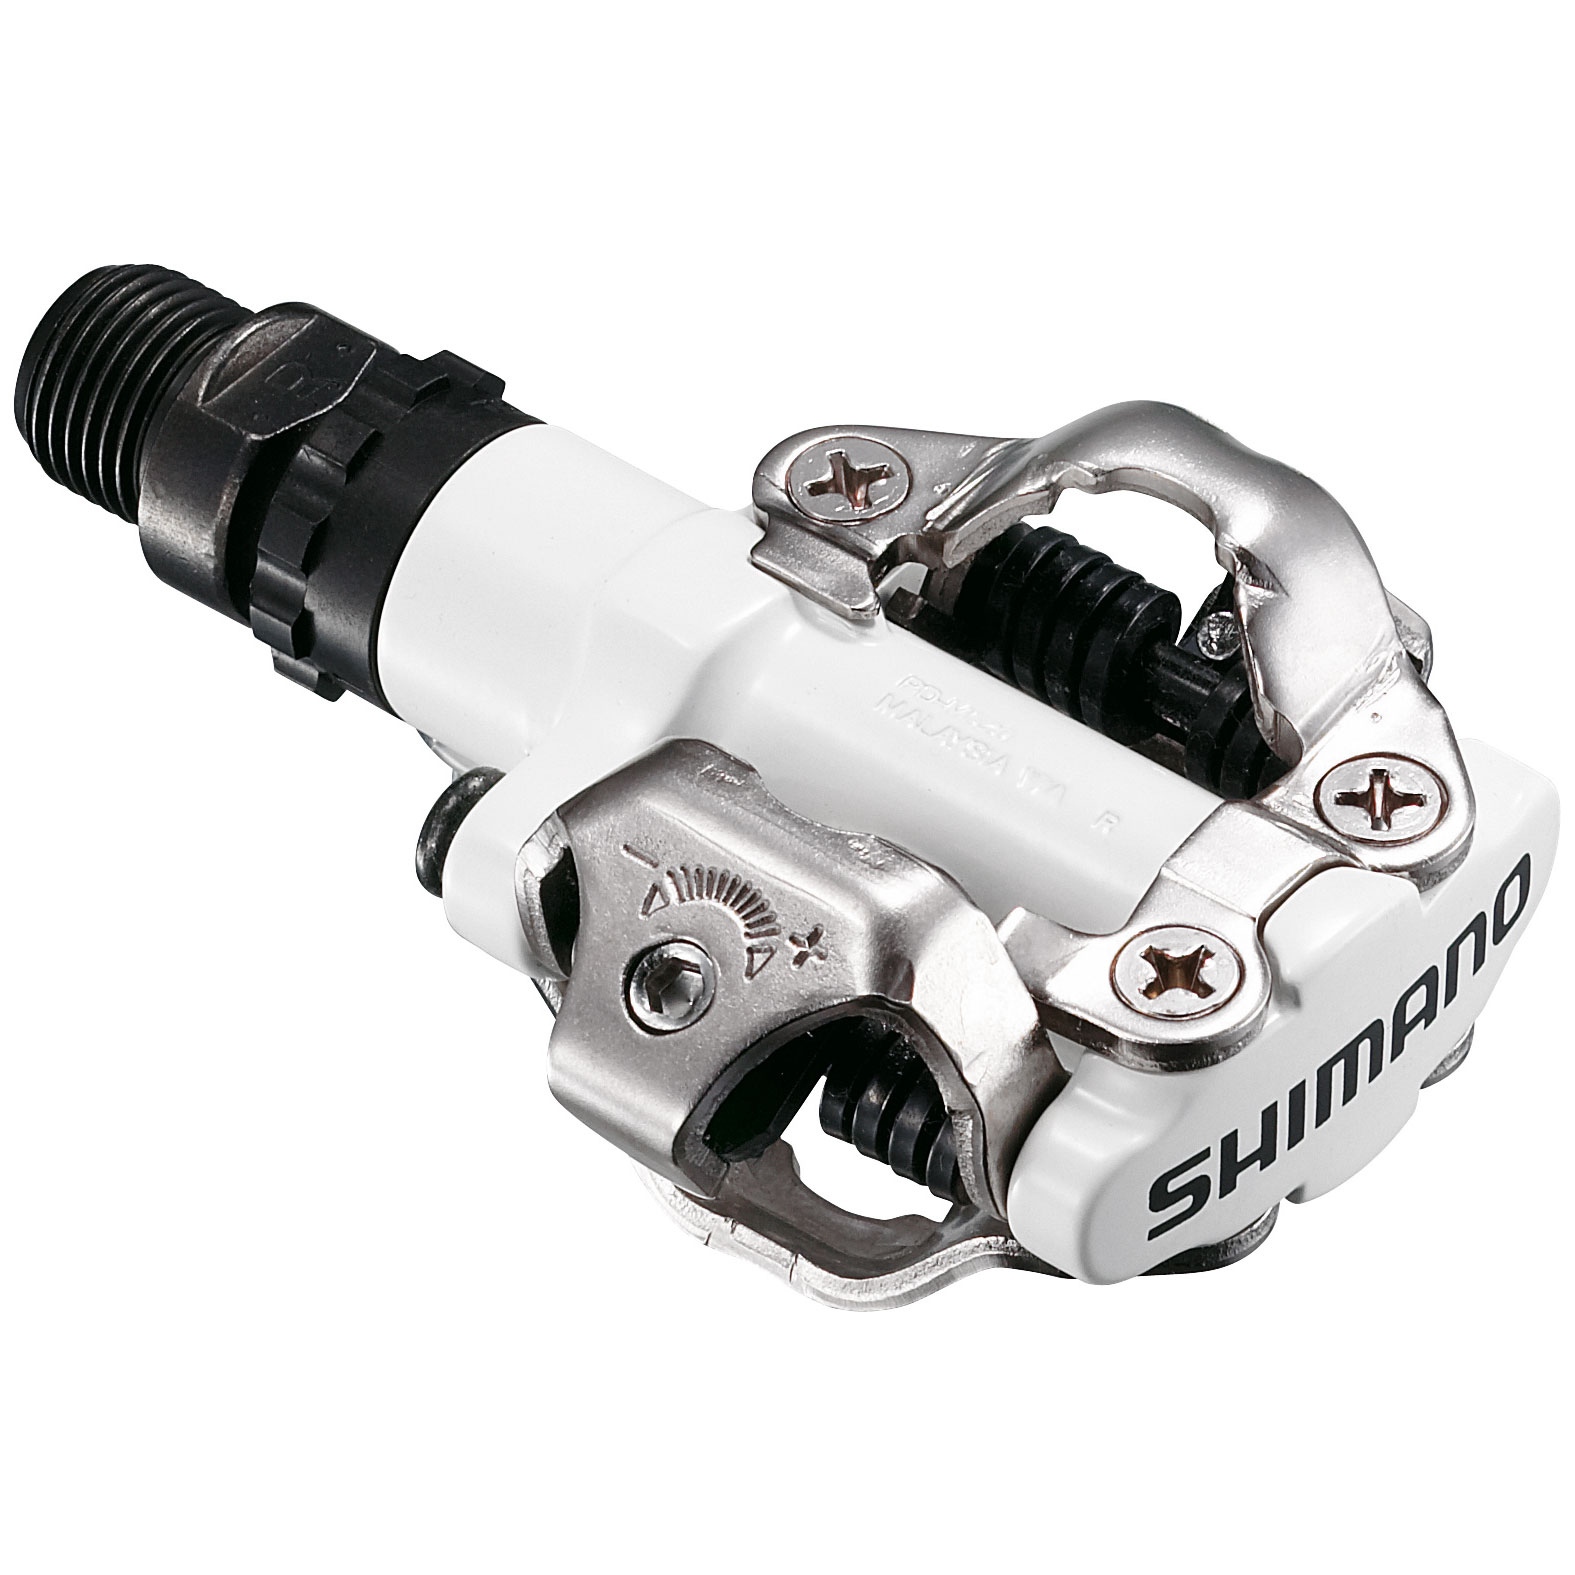 Picture of Shimano PD-M520 SPD Pedal - white